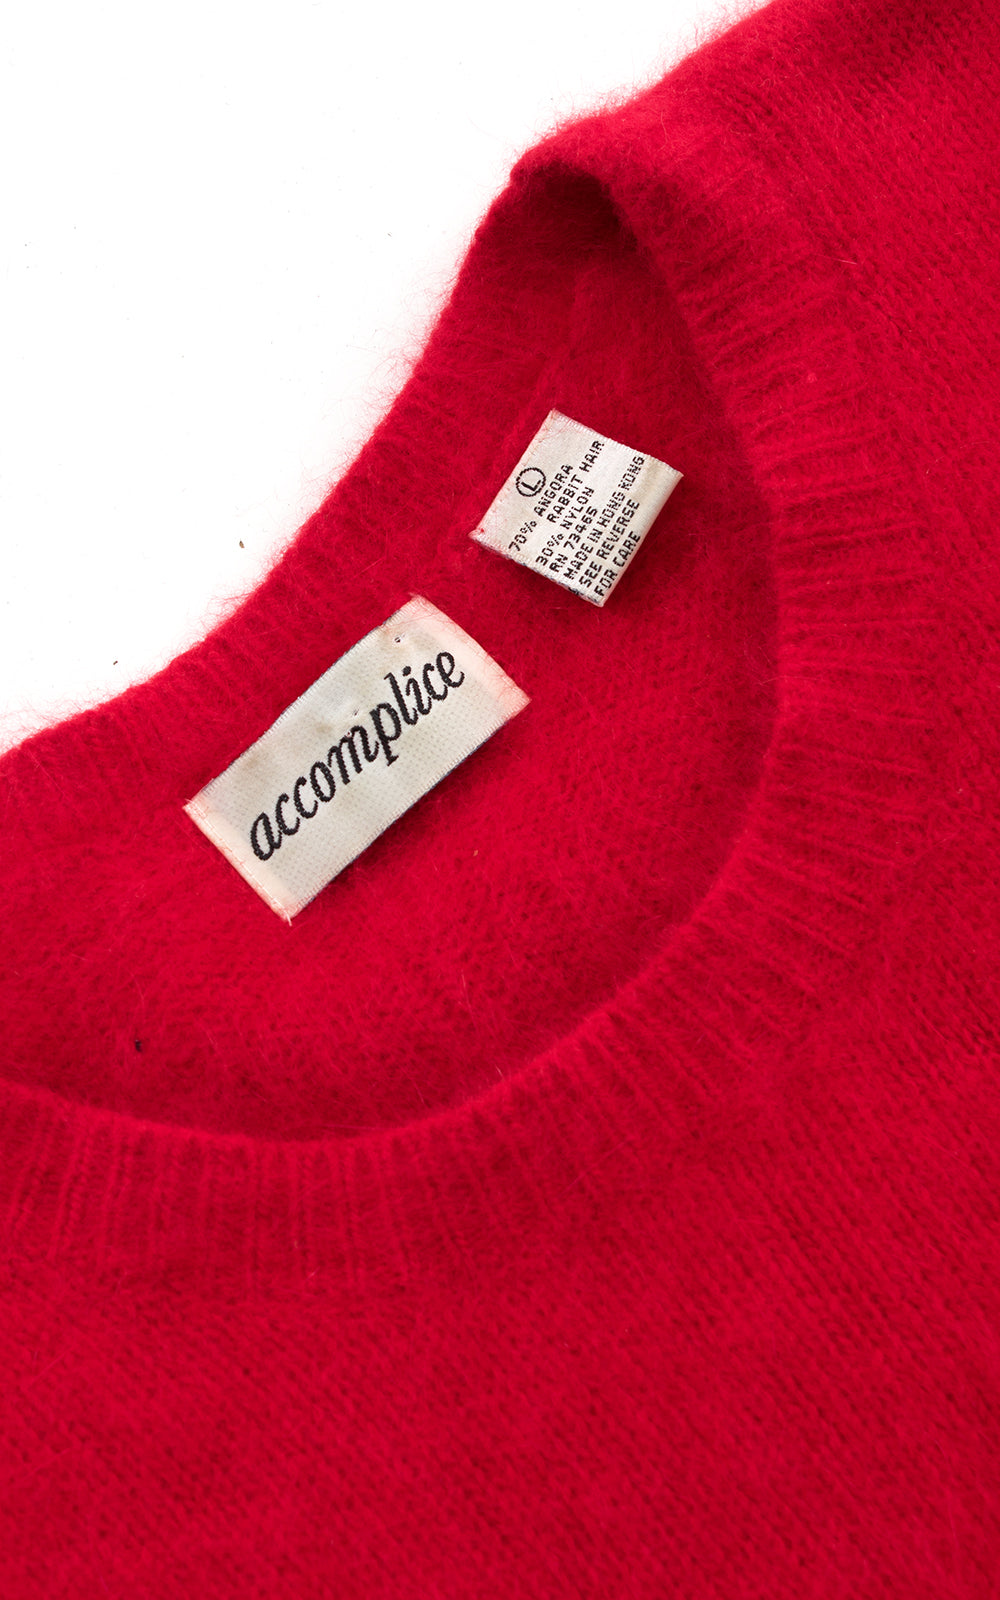 1980s Red Angora Knit Cropped Sweater